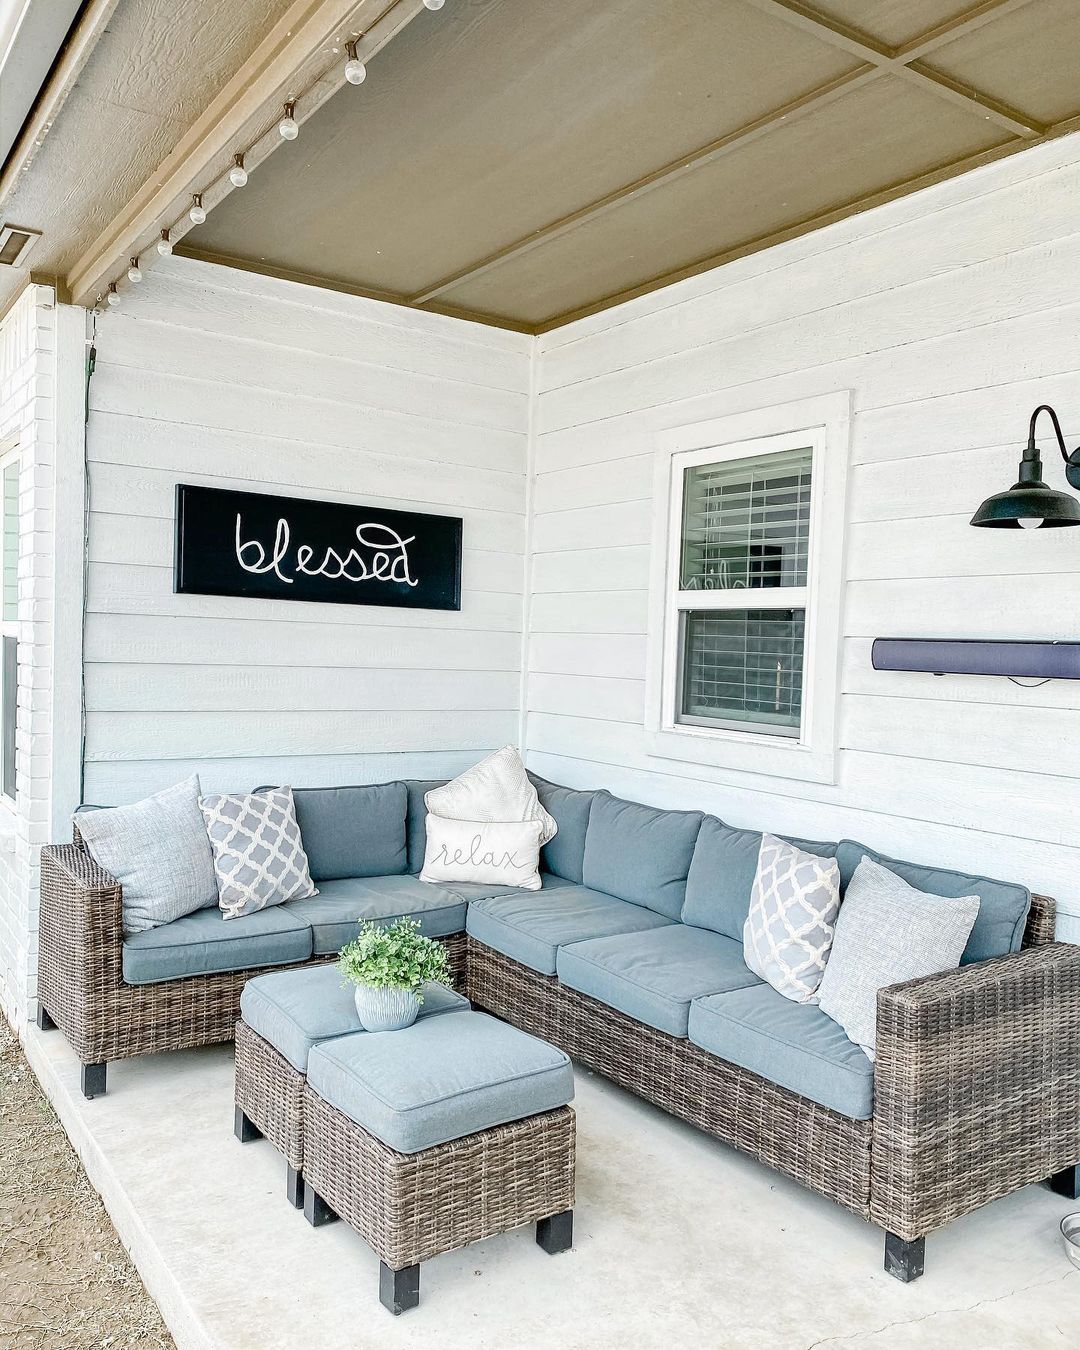 Outdoor Farmhouse Patio with a Wicker Sectional in the Corner. Photo by Instagram user @tilvacuumdouspart